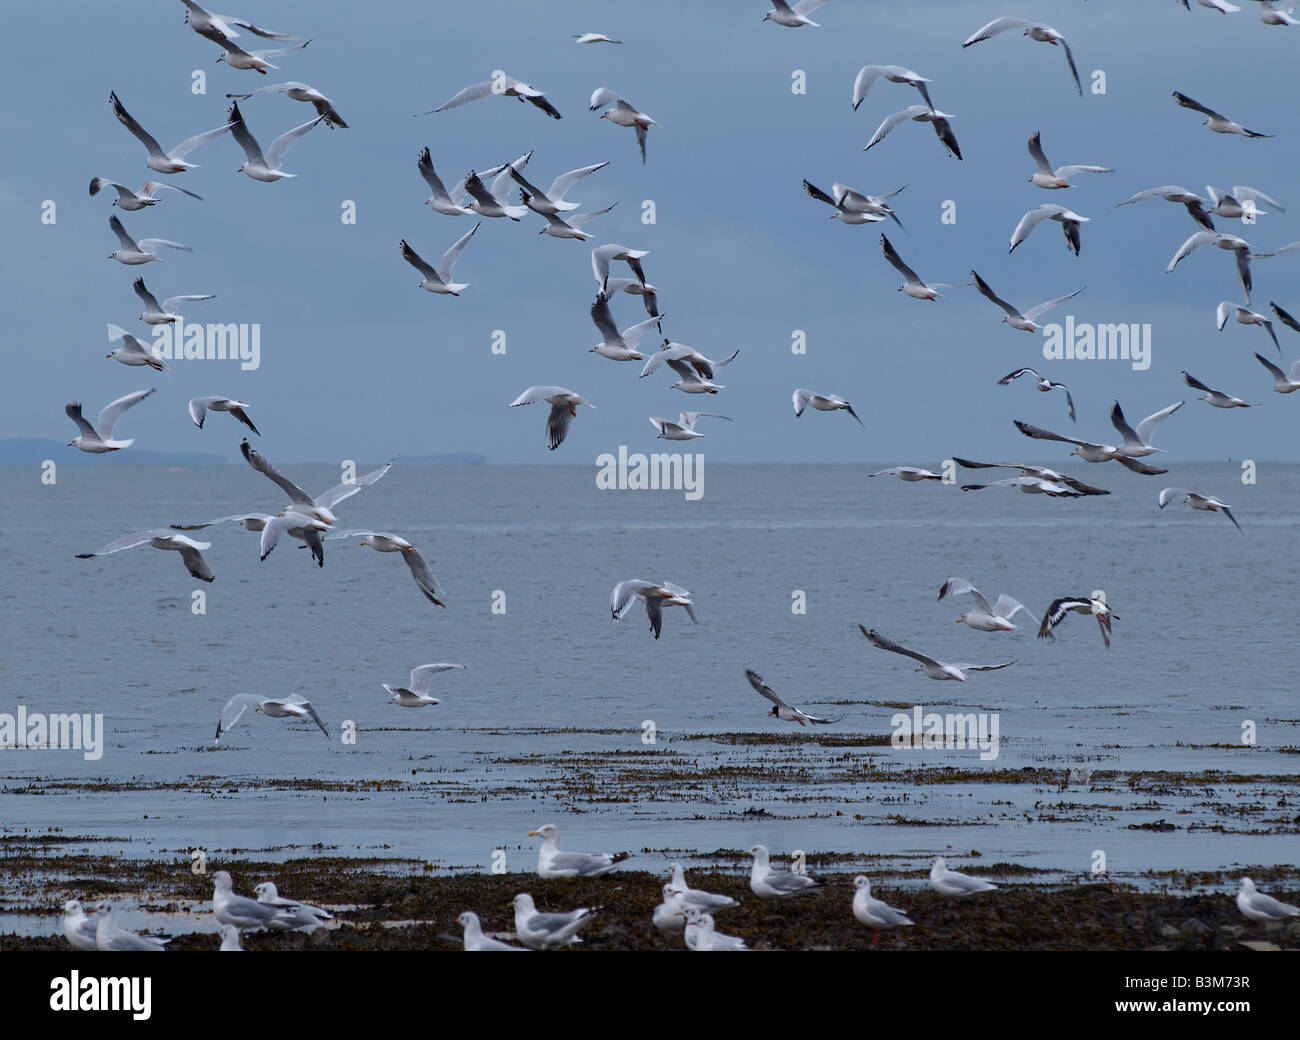 A flock of Black headed gulls, Larus ridibundus. Taking off from the waters edge Stock Photo